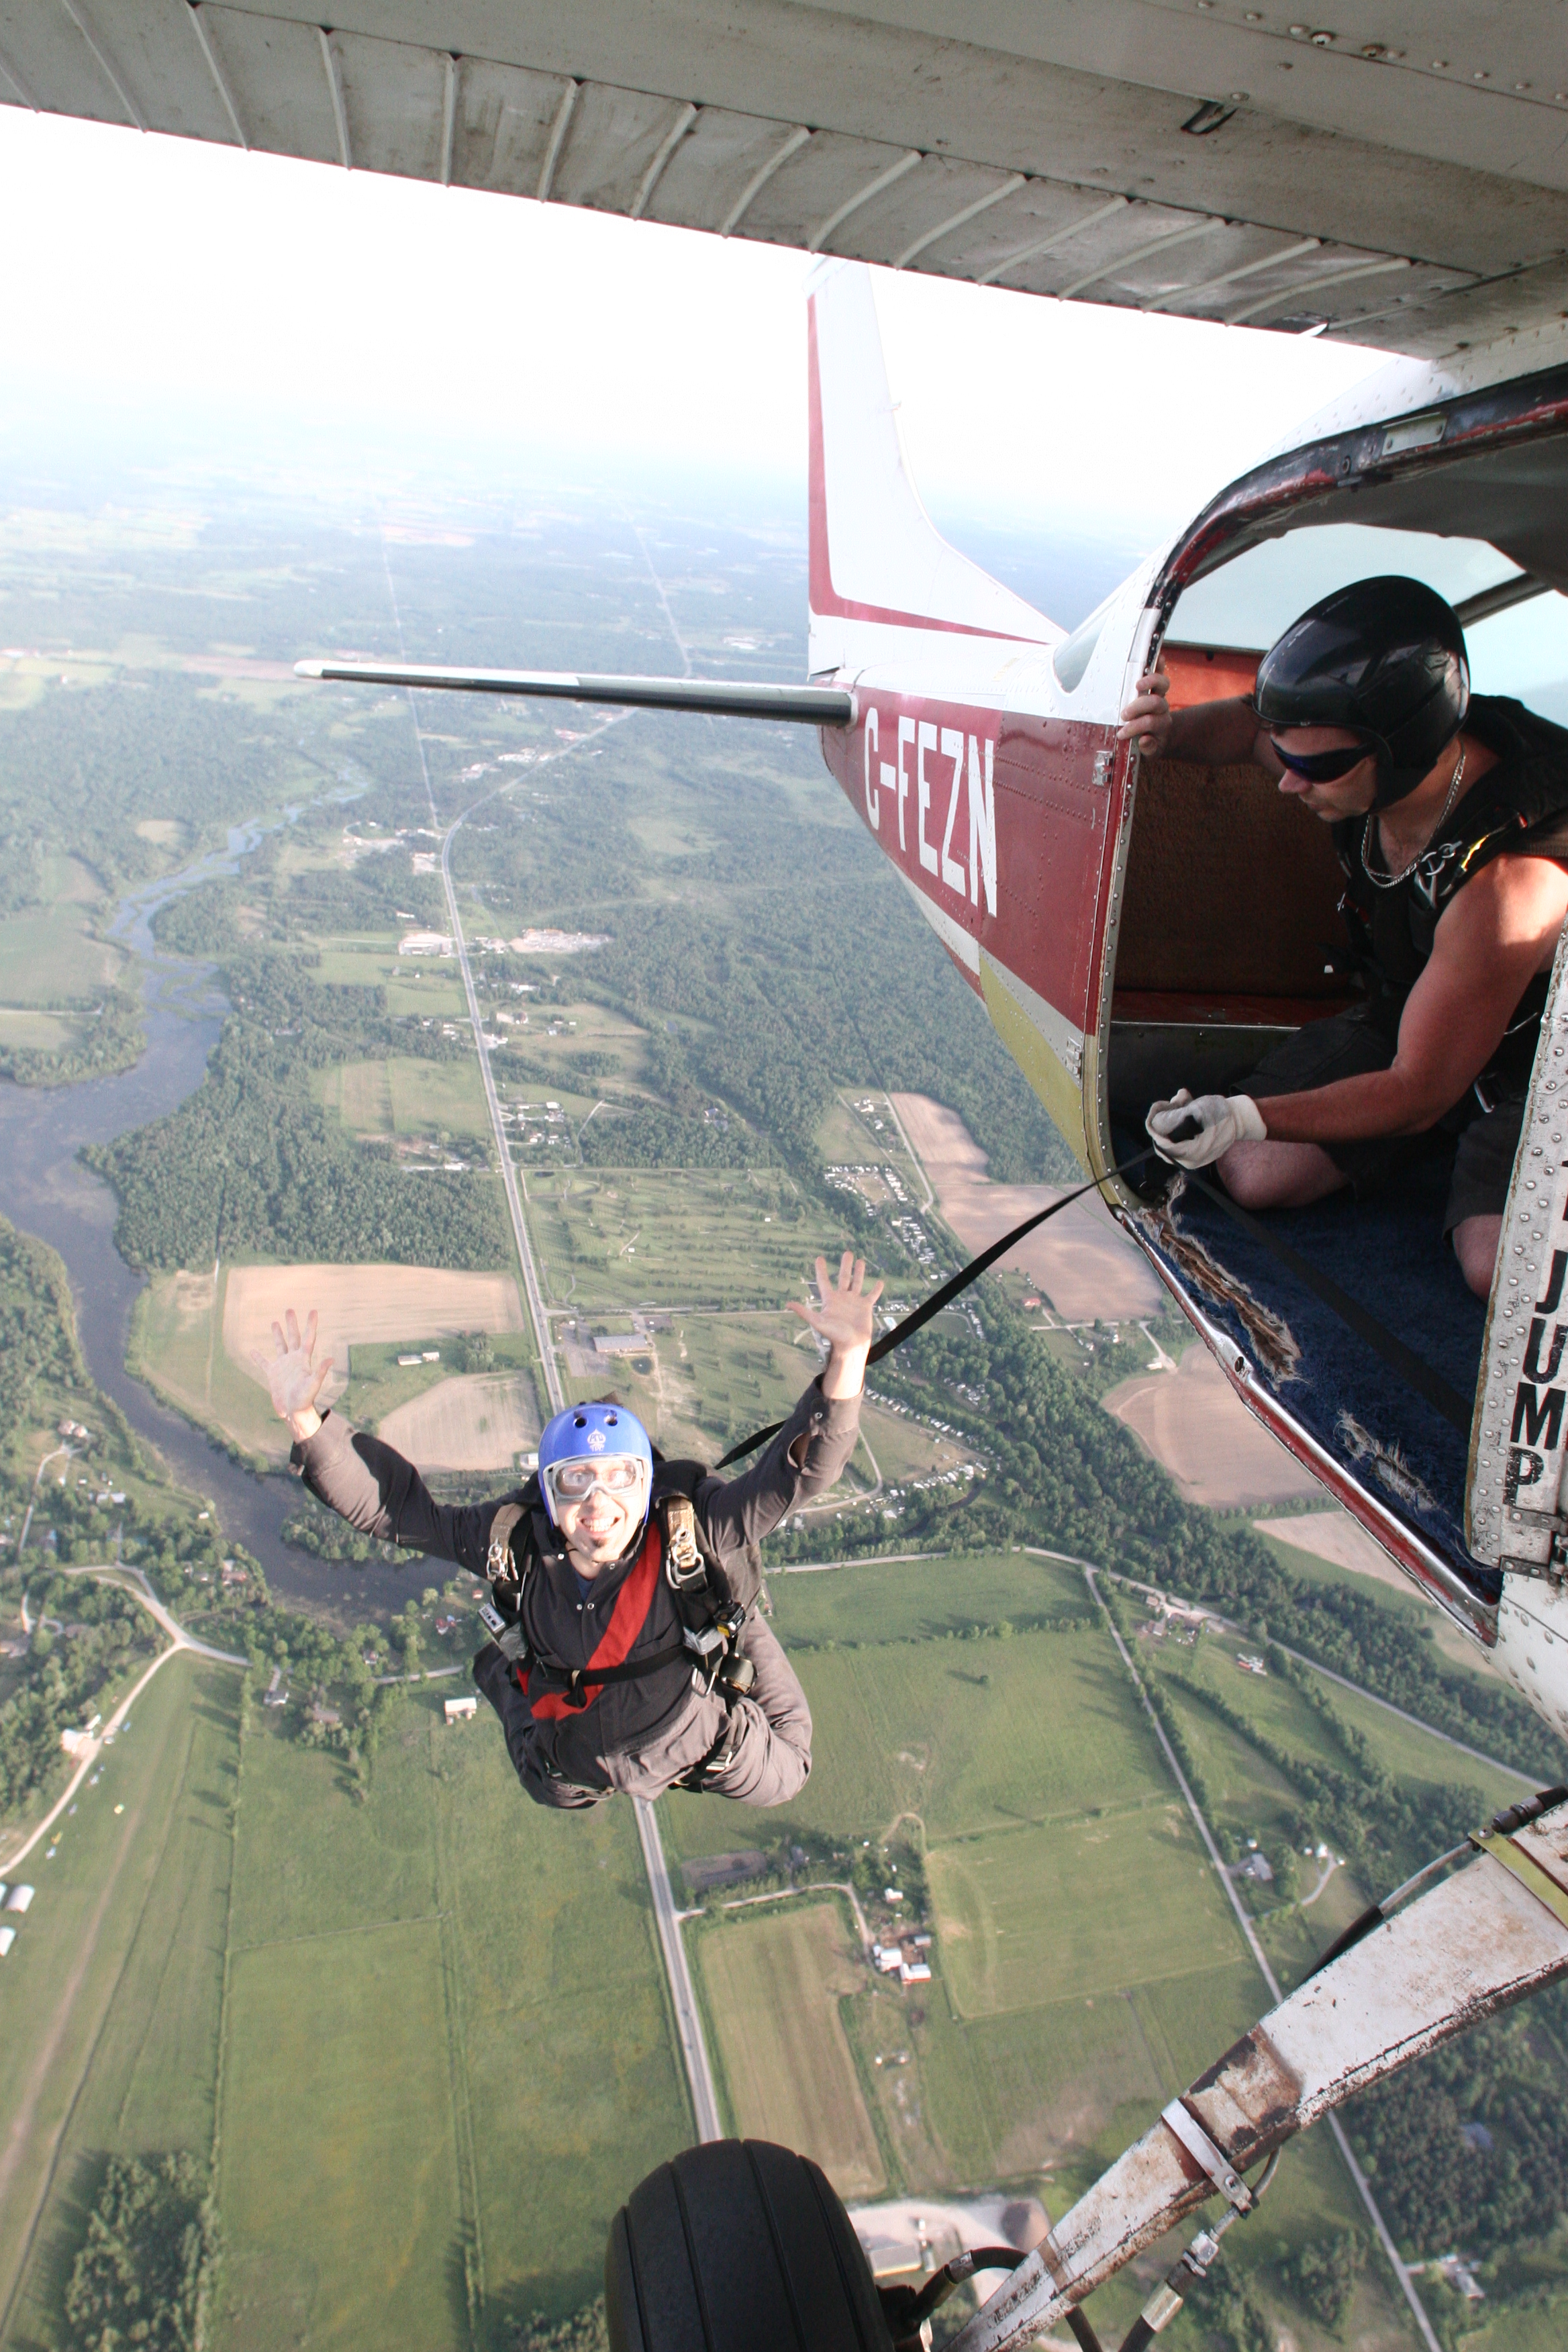 File:Skydiver exiting aircraft with static line still attached.jpg